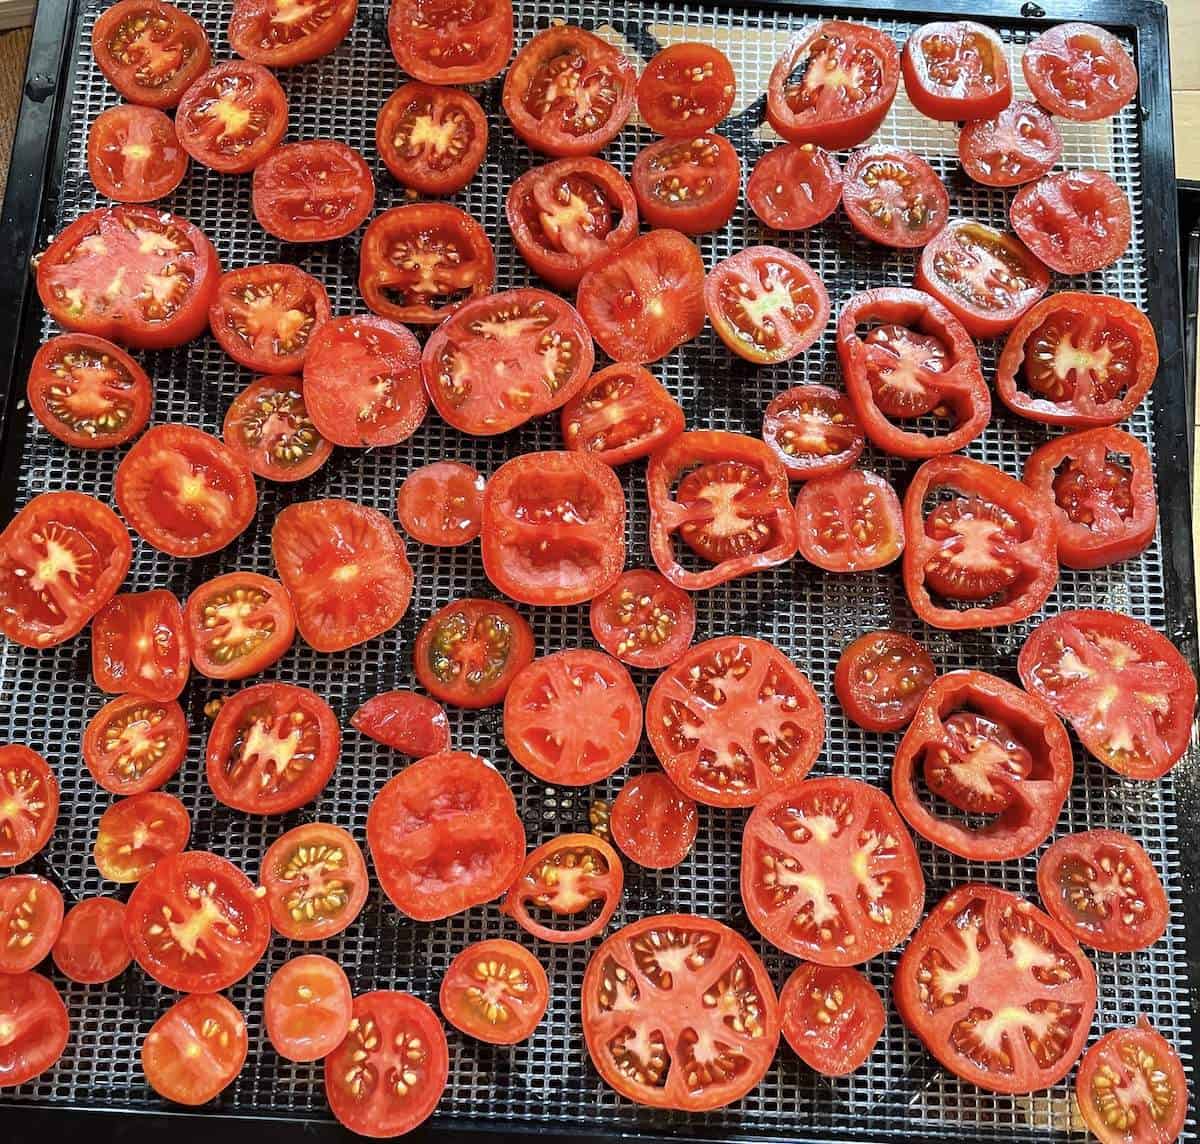 Sliced tomatoes on an excalibur dehydrator tray.